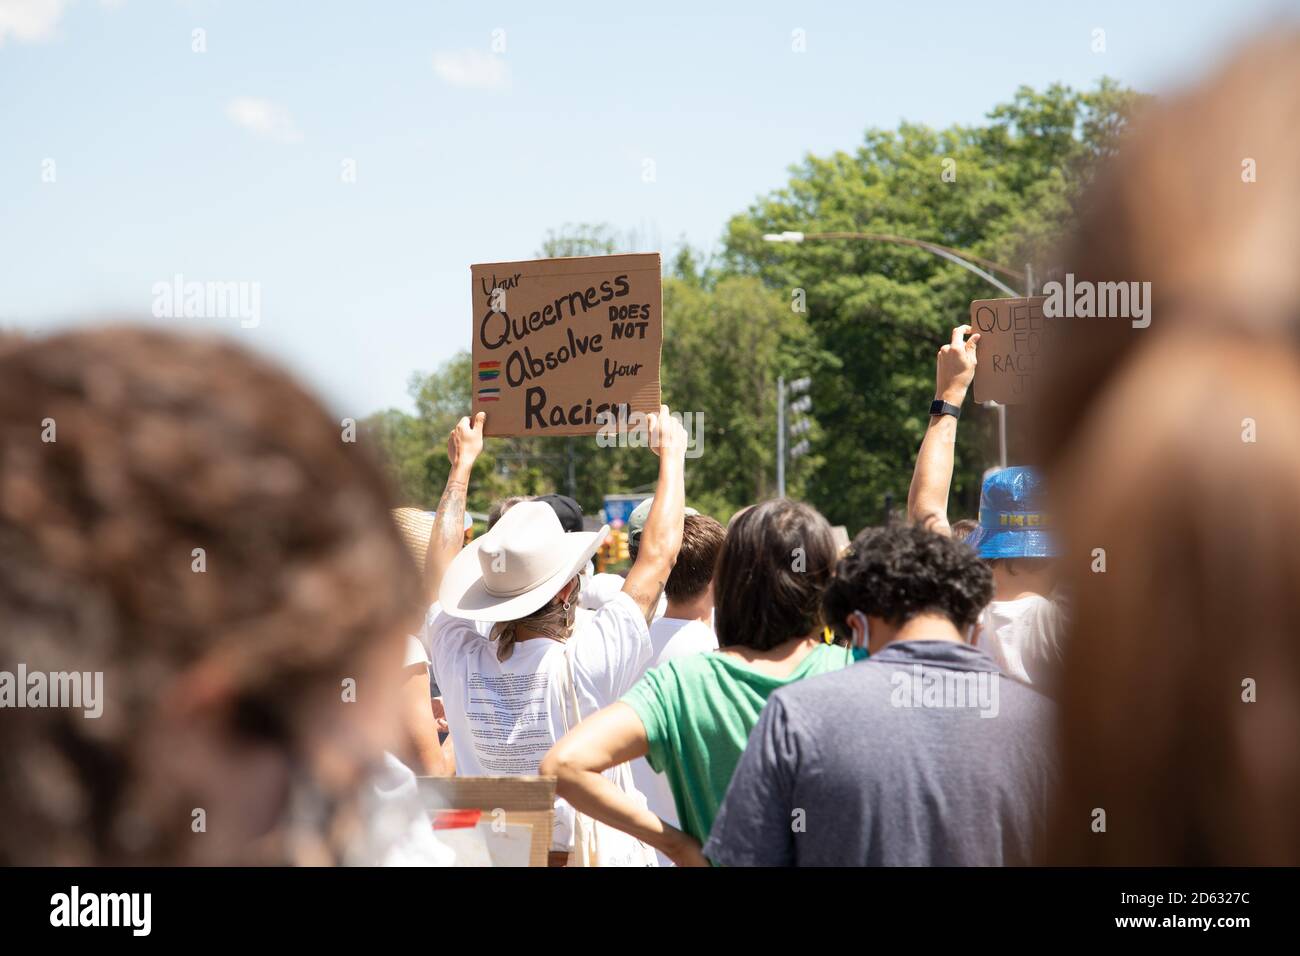 Protester holding up Your Queerness does not Absolve your Racism Sign during Protest, Brooklyn, New York, USA Stock Photo